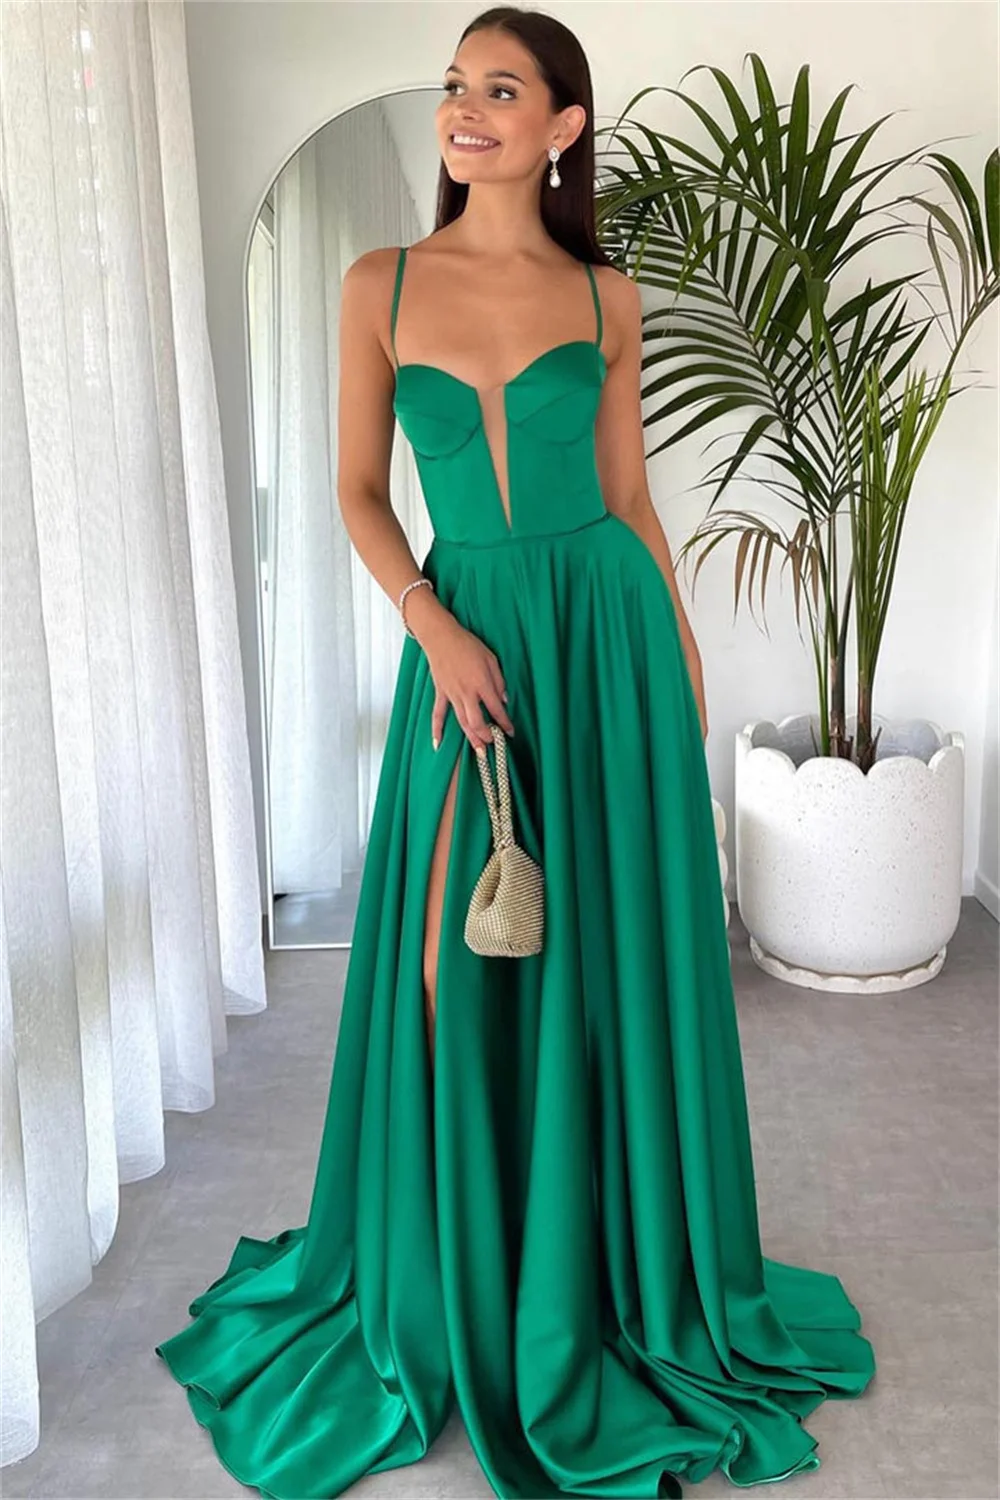 

Spaghetti Straps Strapless Bridesmaid Dresses With Split Side Sheer Corset Sleeveless Evening Gowns A-line Long Formal Ball Gown